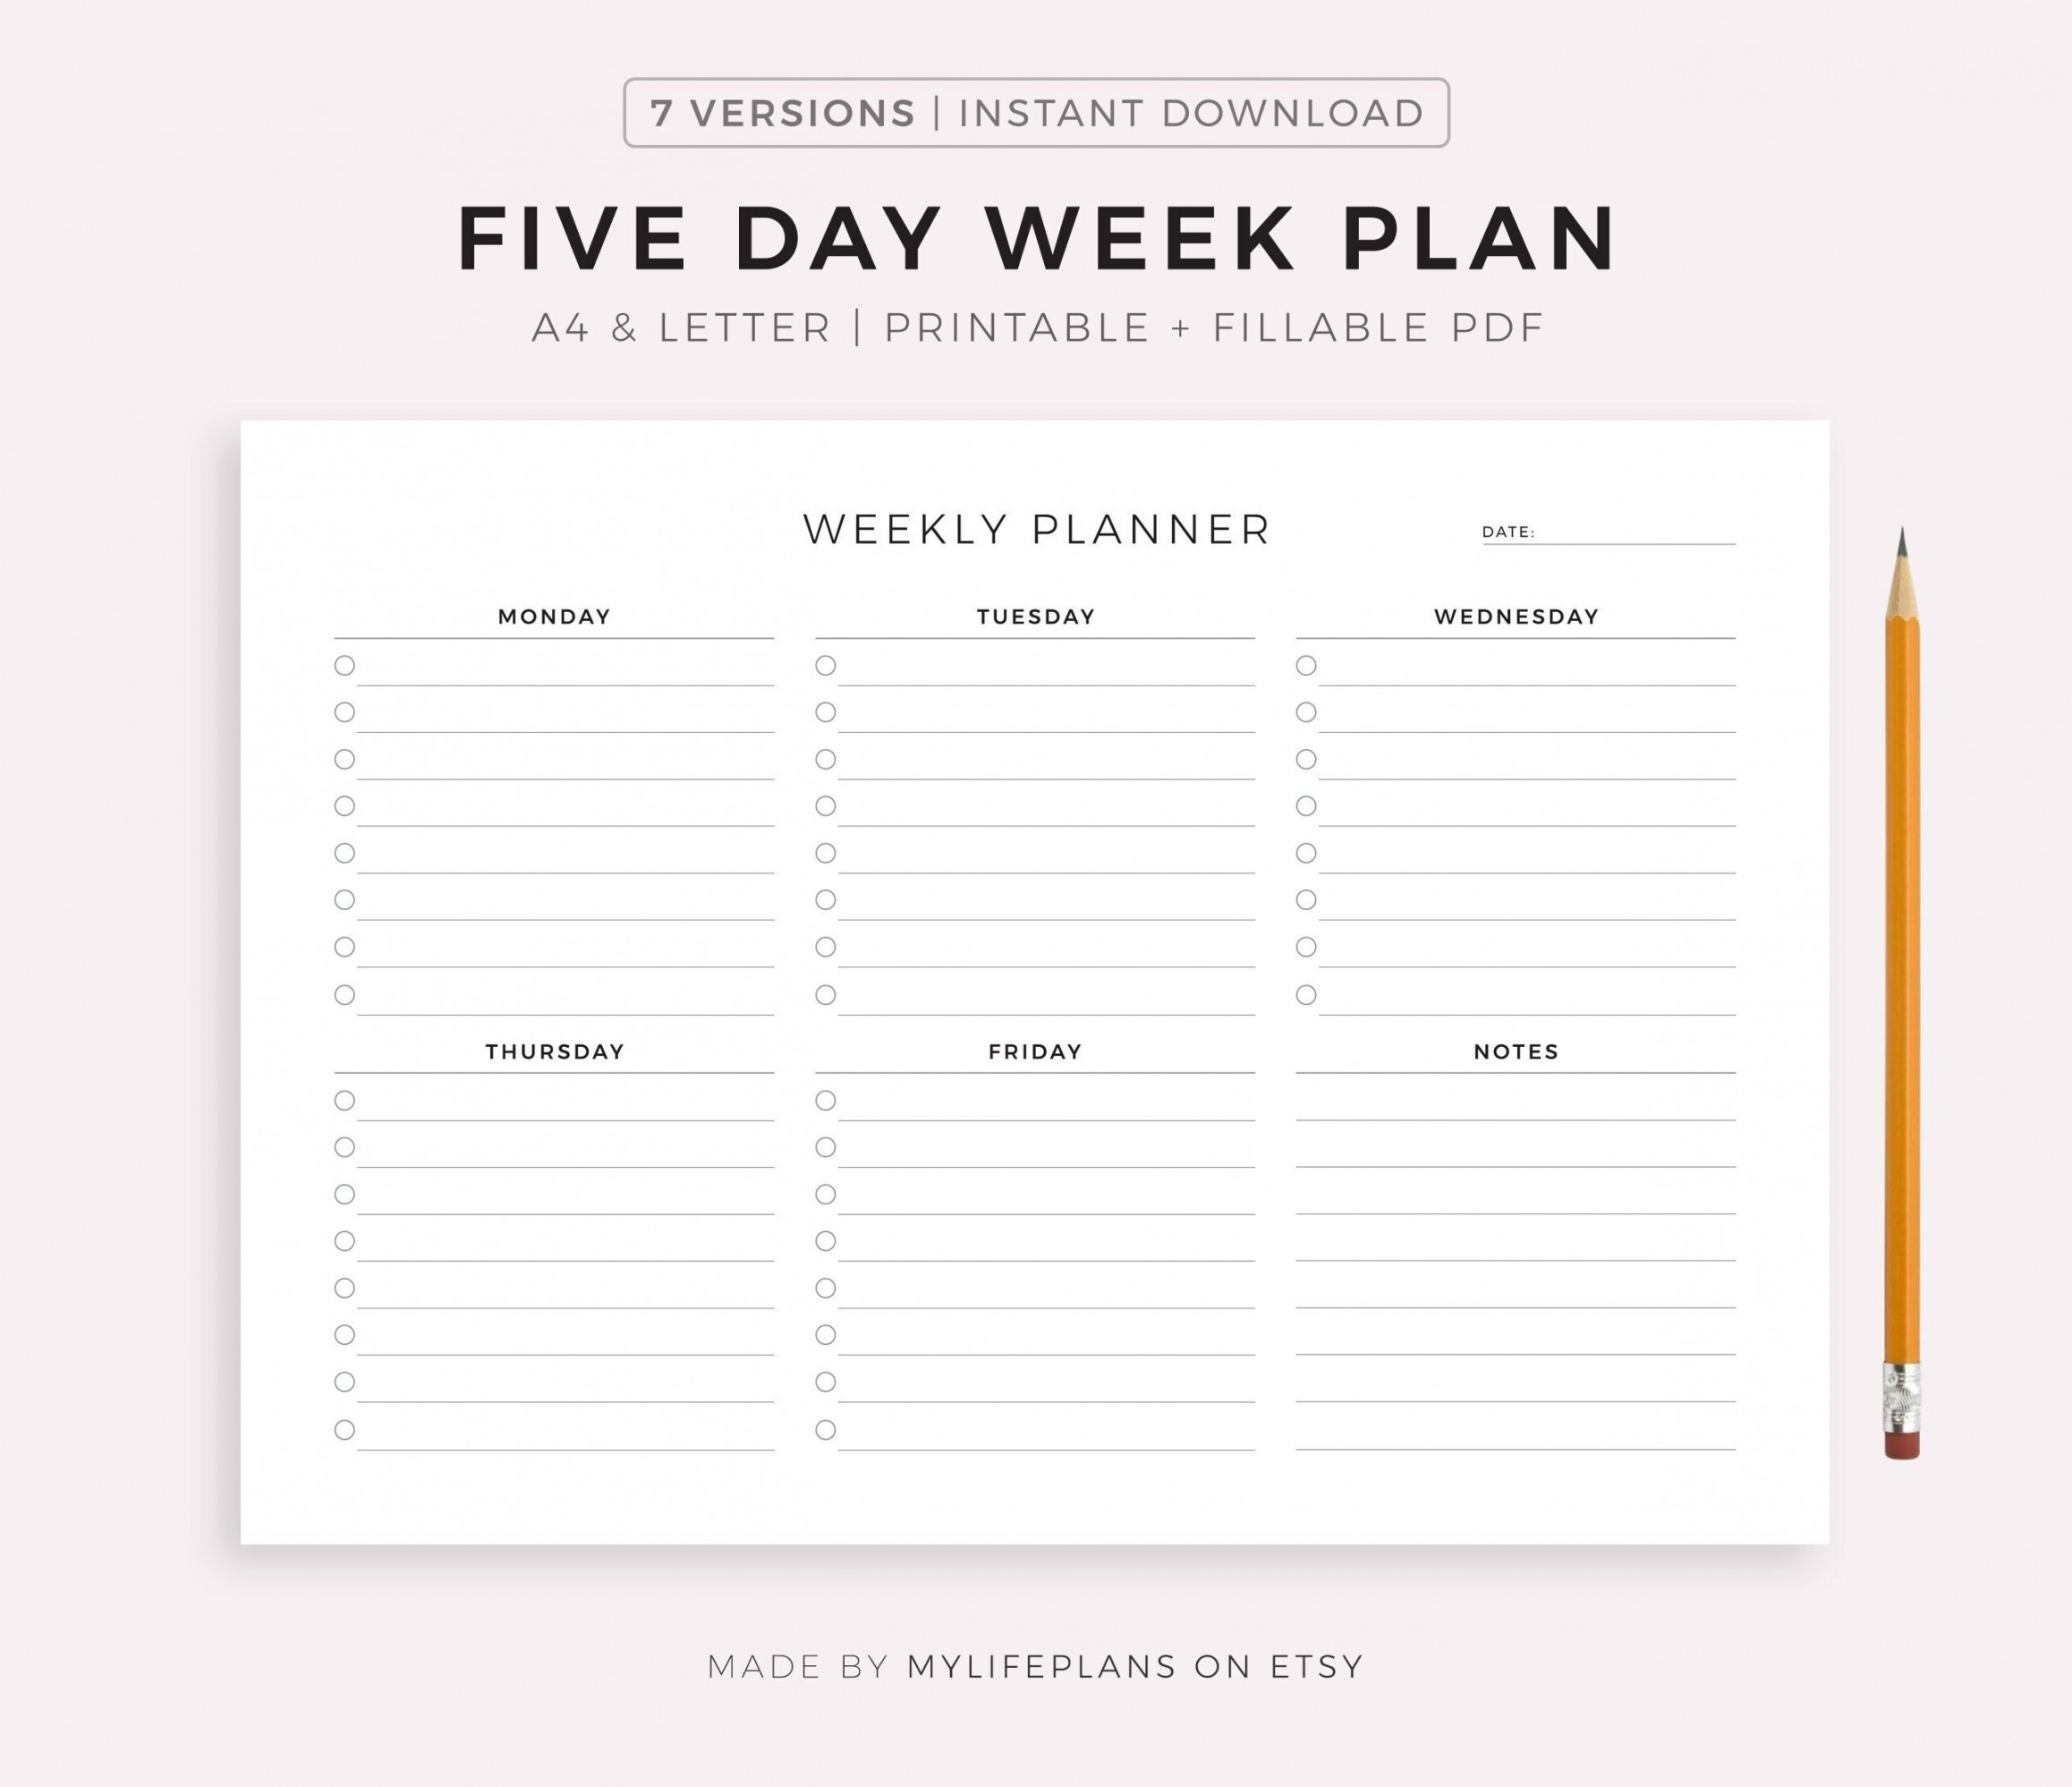 Five Day Weekly Planner Printable to Do List Weekly Schedule - Etsy